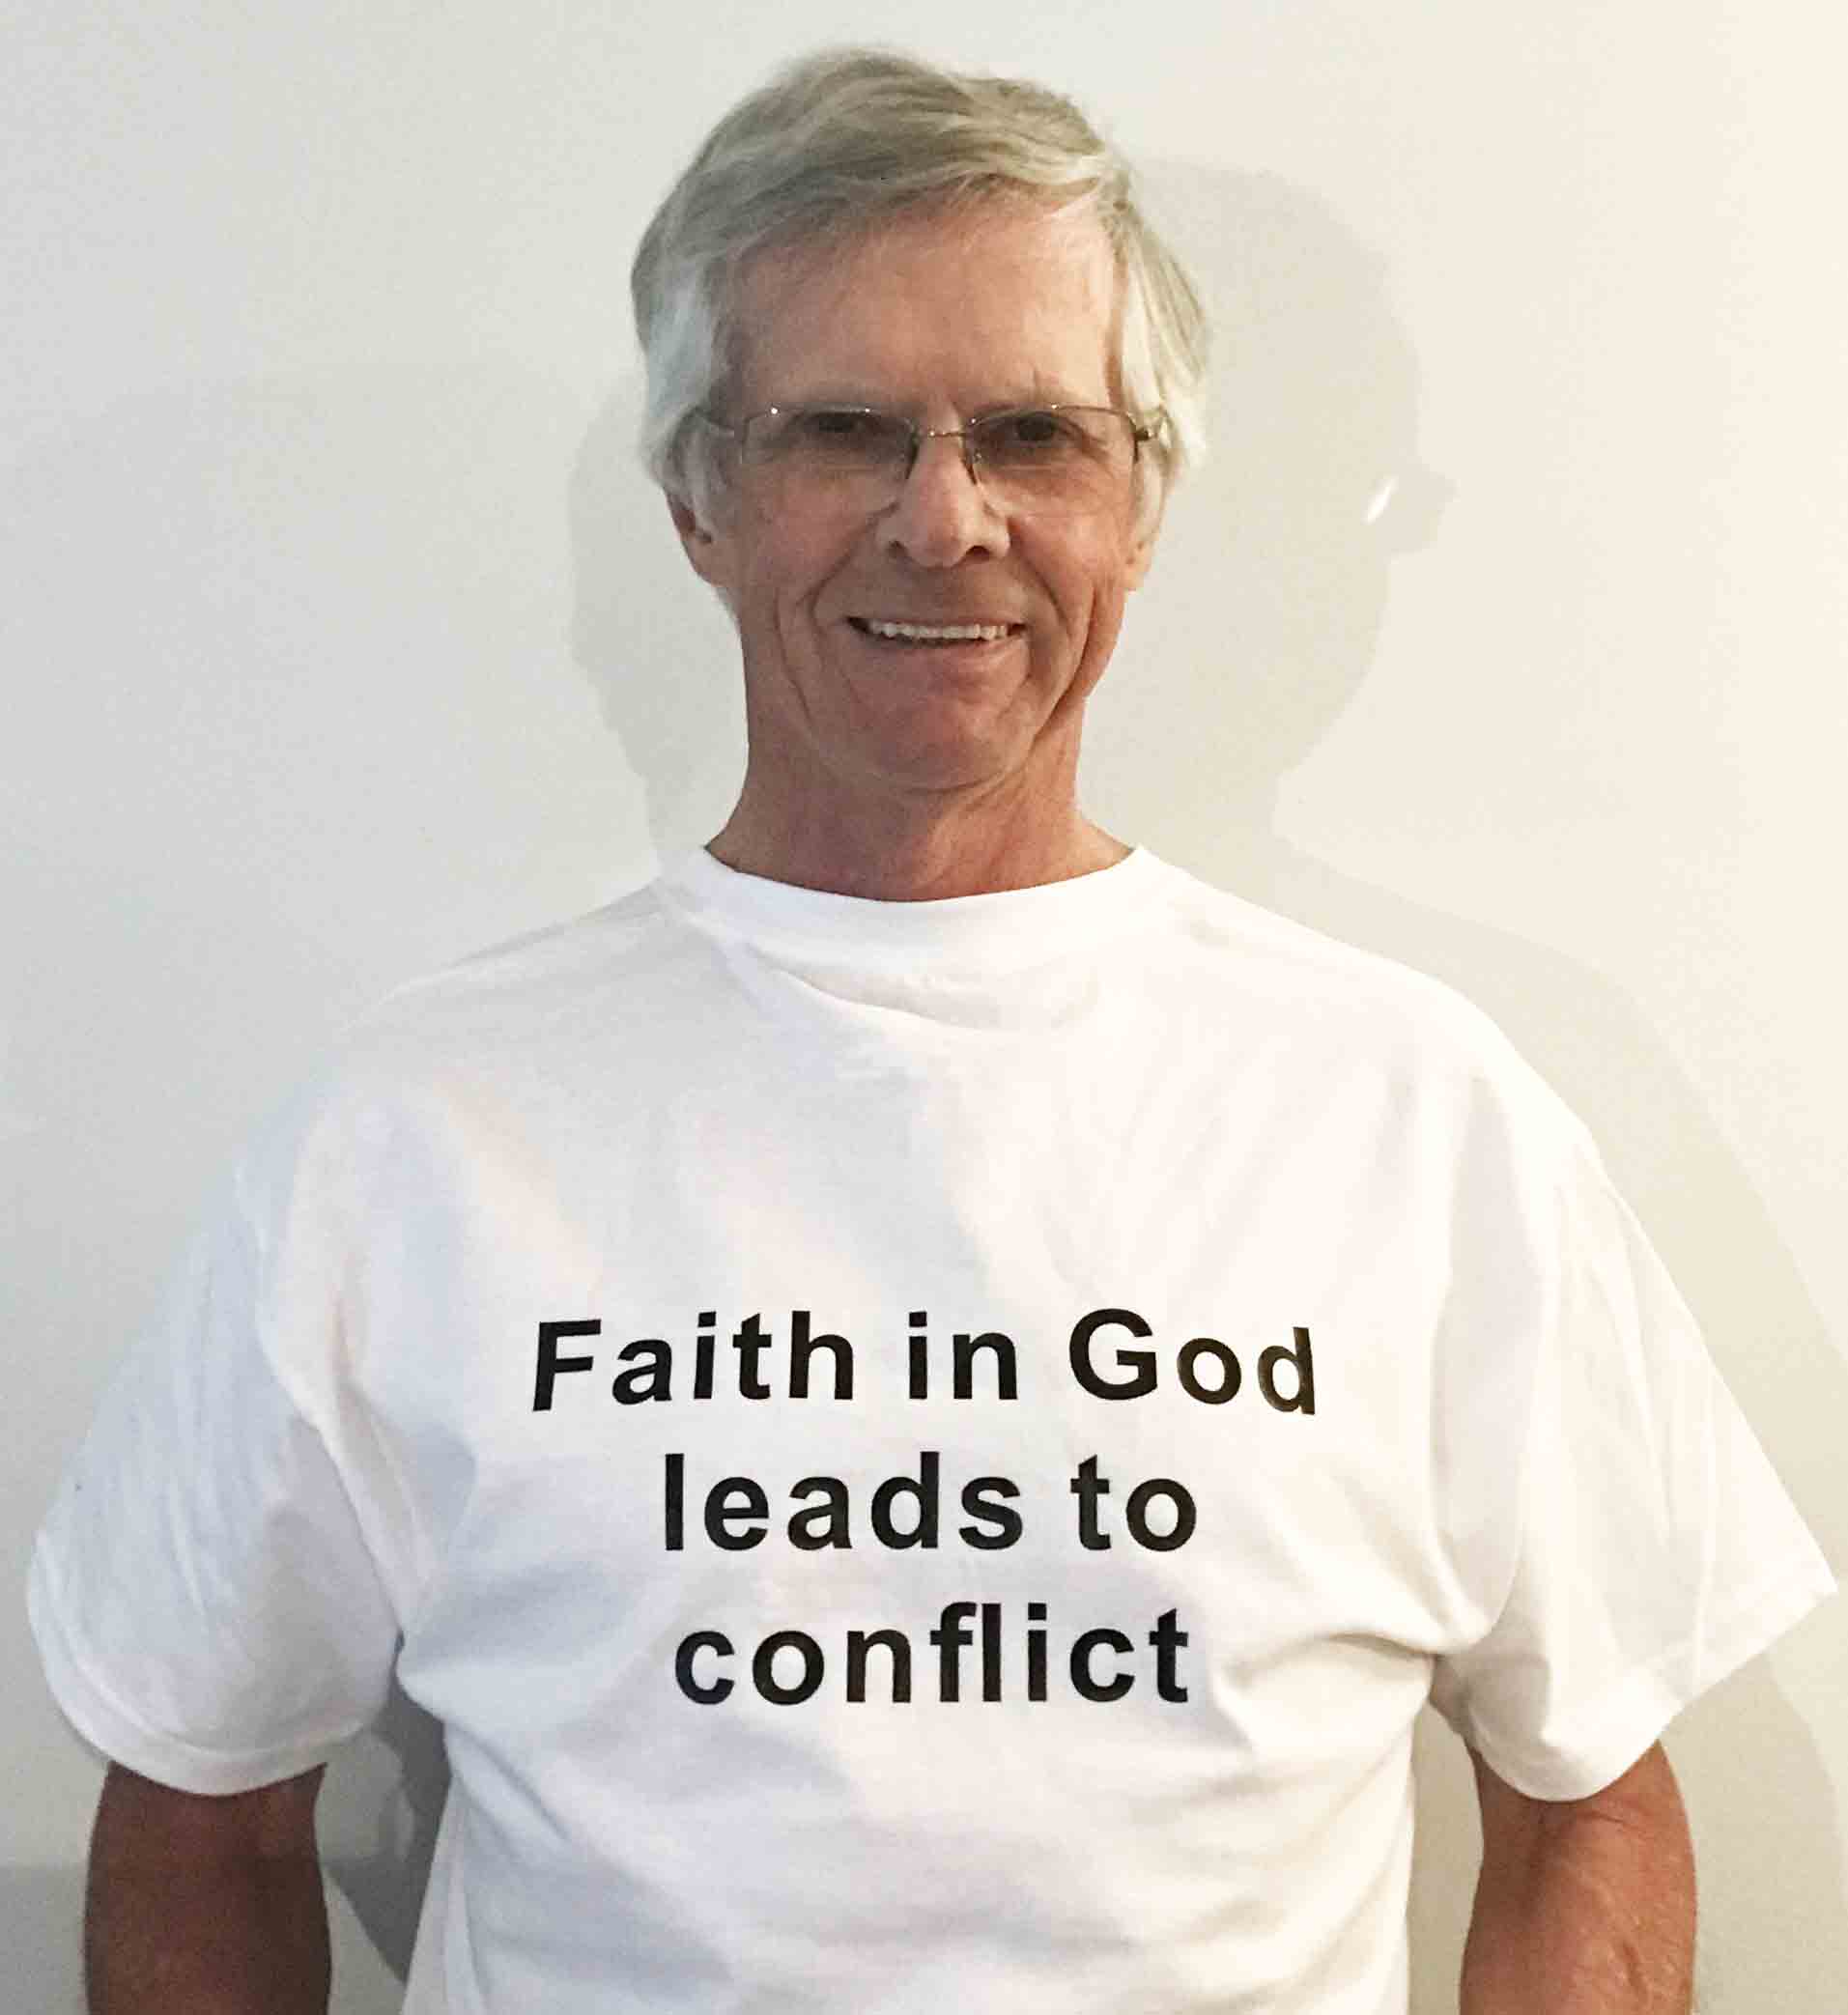 Darwin Bedford wearing his shirt that says 'Faith in God leads to conflict'